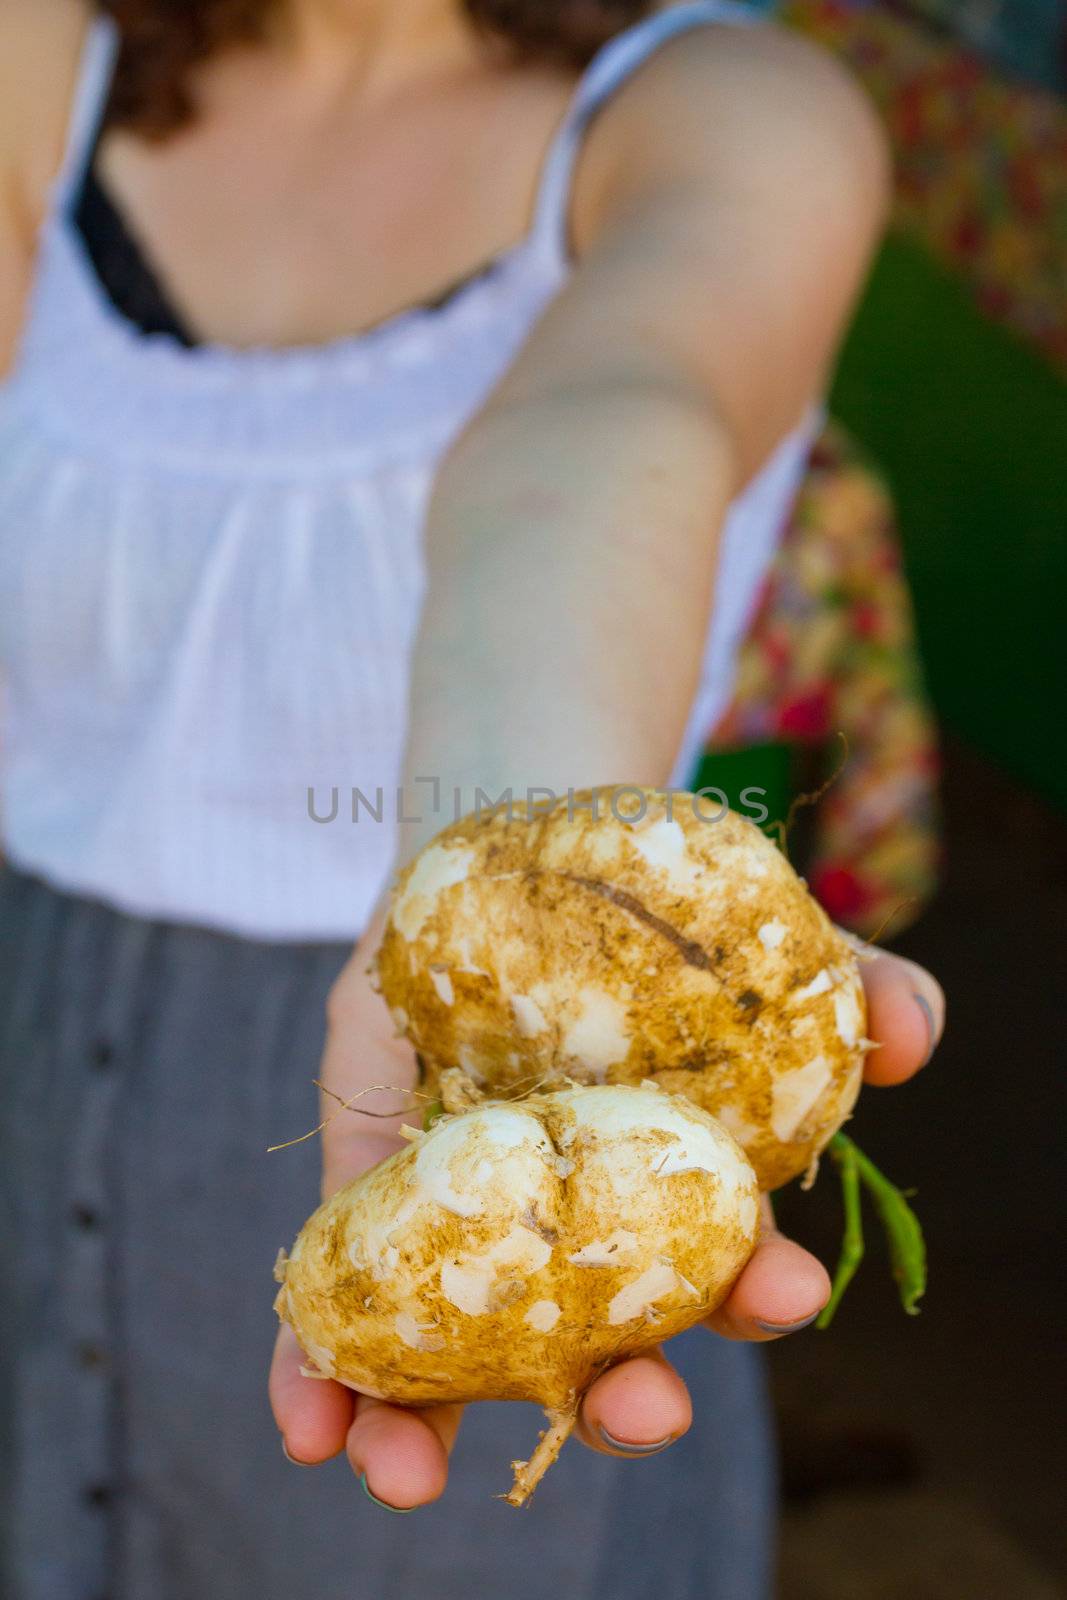 An out of focus woman holds some unique tropical Hawaiian jicama in her hand.